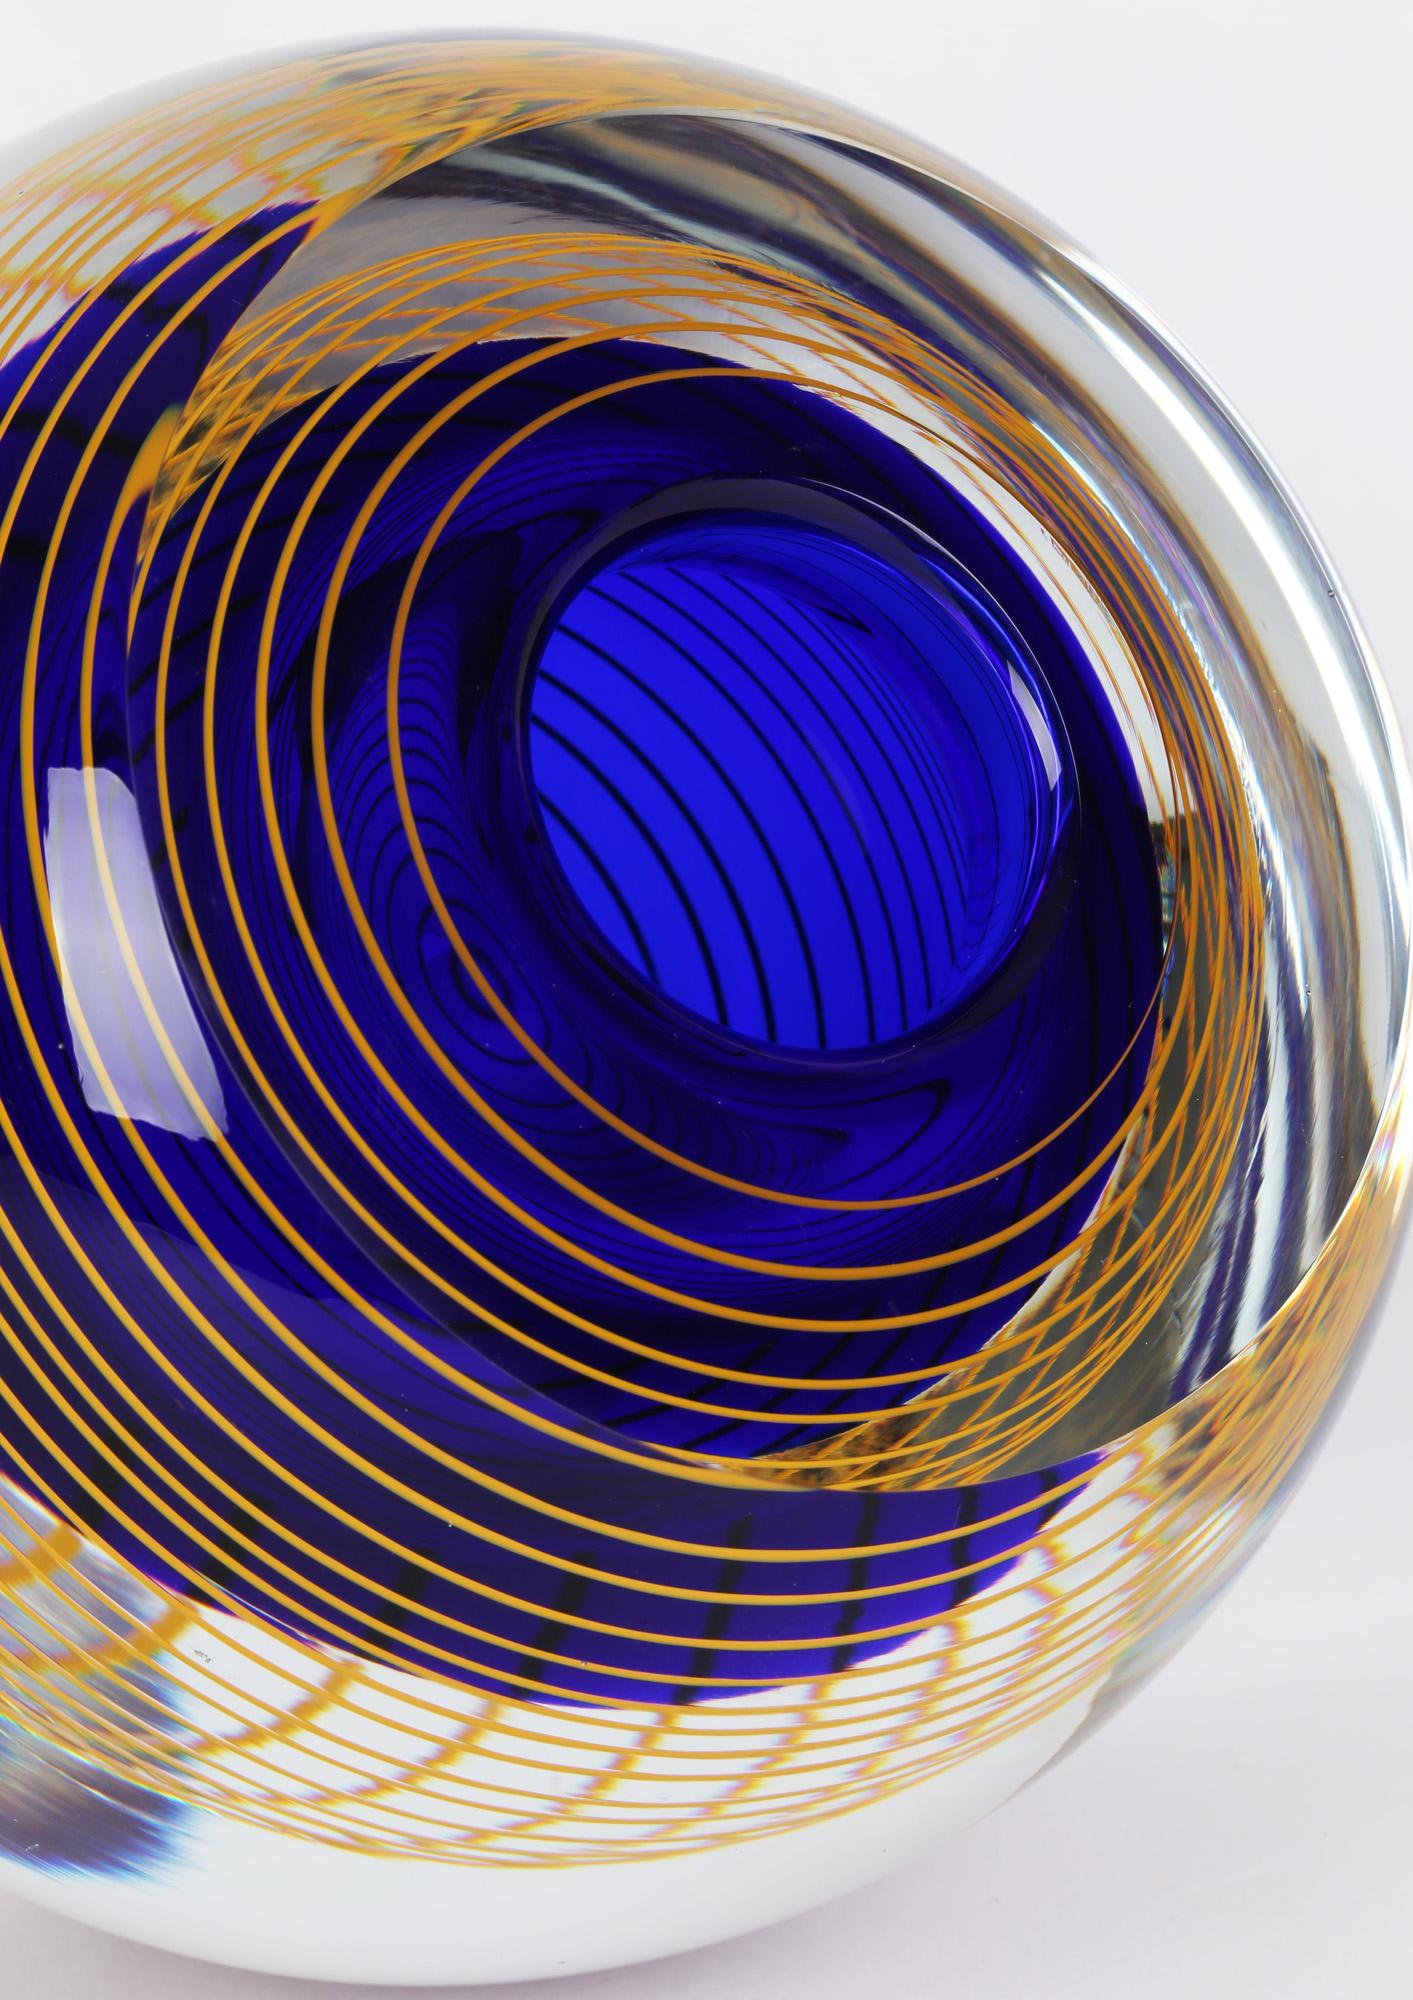 A stunning Czech art glass vase with a spiral twist design by Stanislav Libensky (1921-2002) for Beranek Skrdlovice Glassworks and dating from around 1977. This heavily hand made vase is of rounded bulbous shape with a narrow flat polished base and